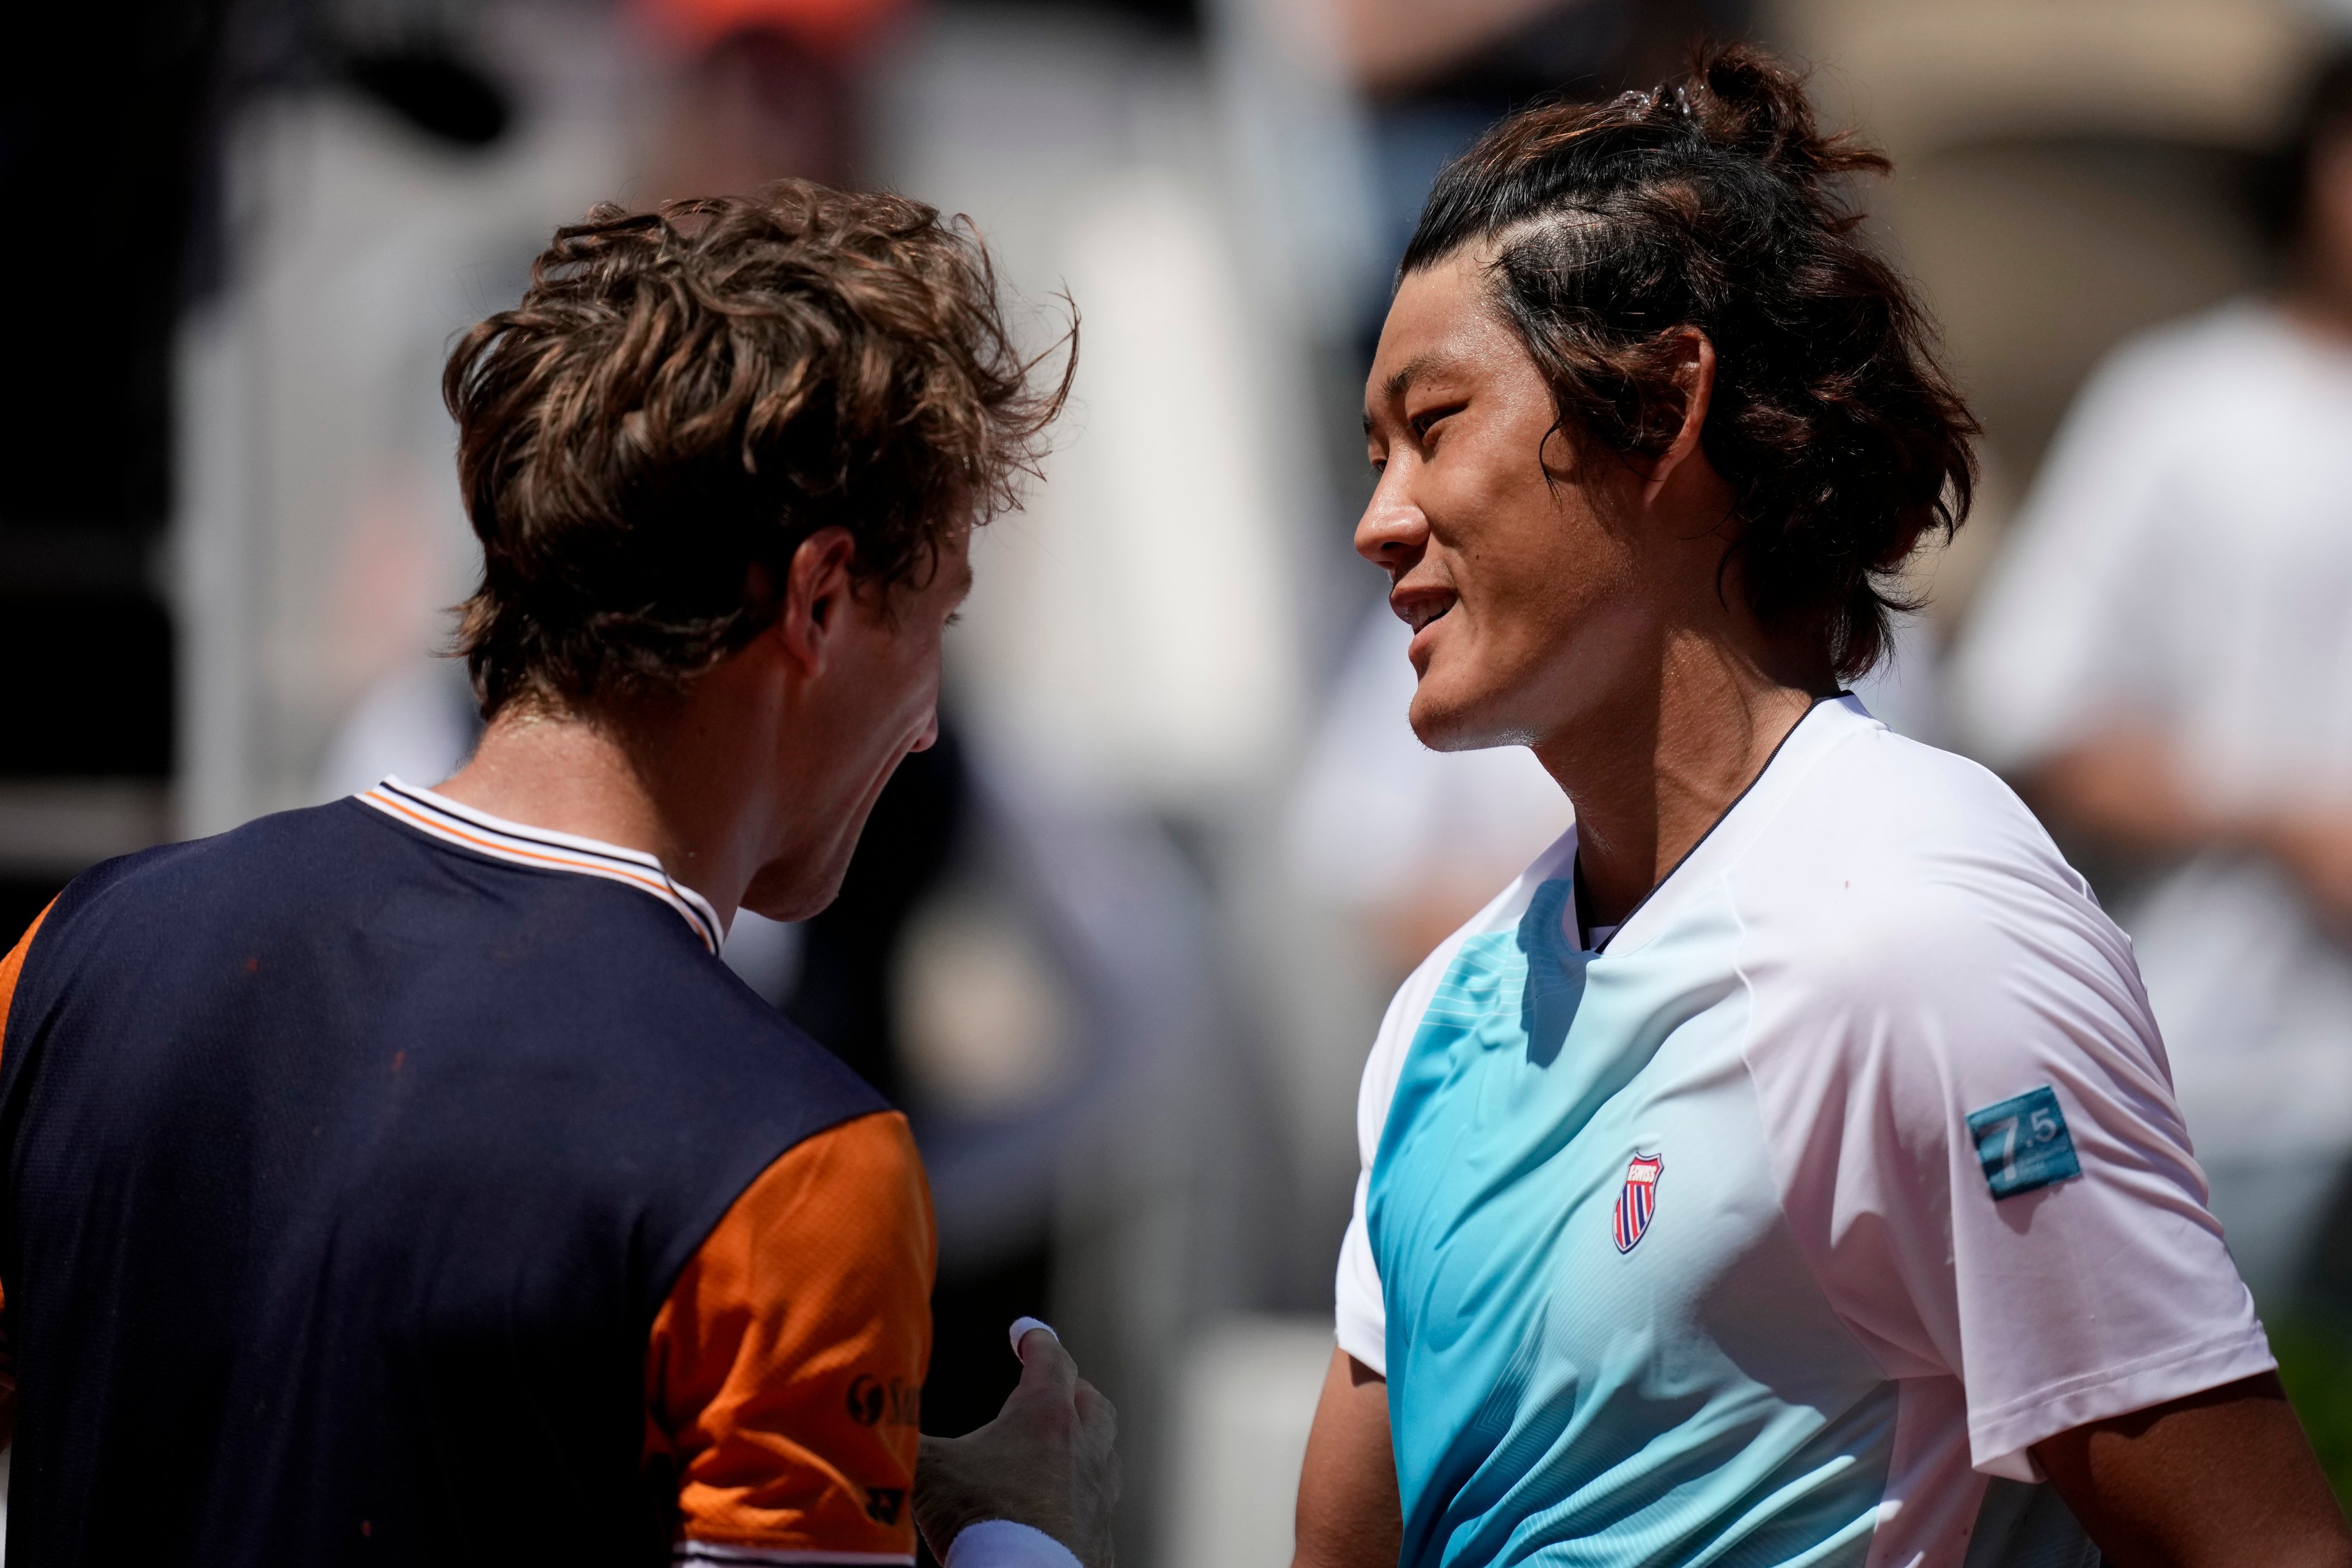 China’s Zhang Zhizhen shakes hands with Casper Ruud after their third-round match at the French Open. Photo: AP